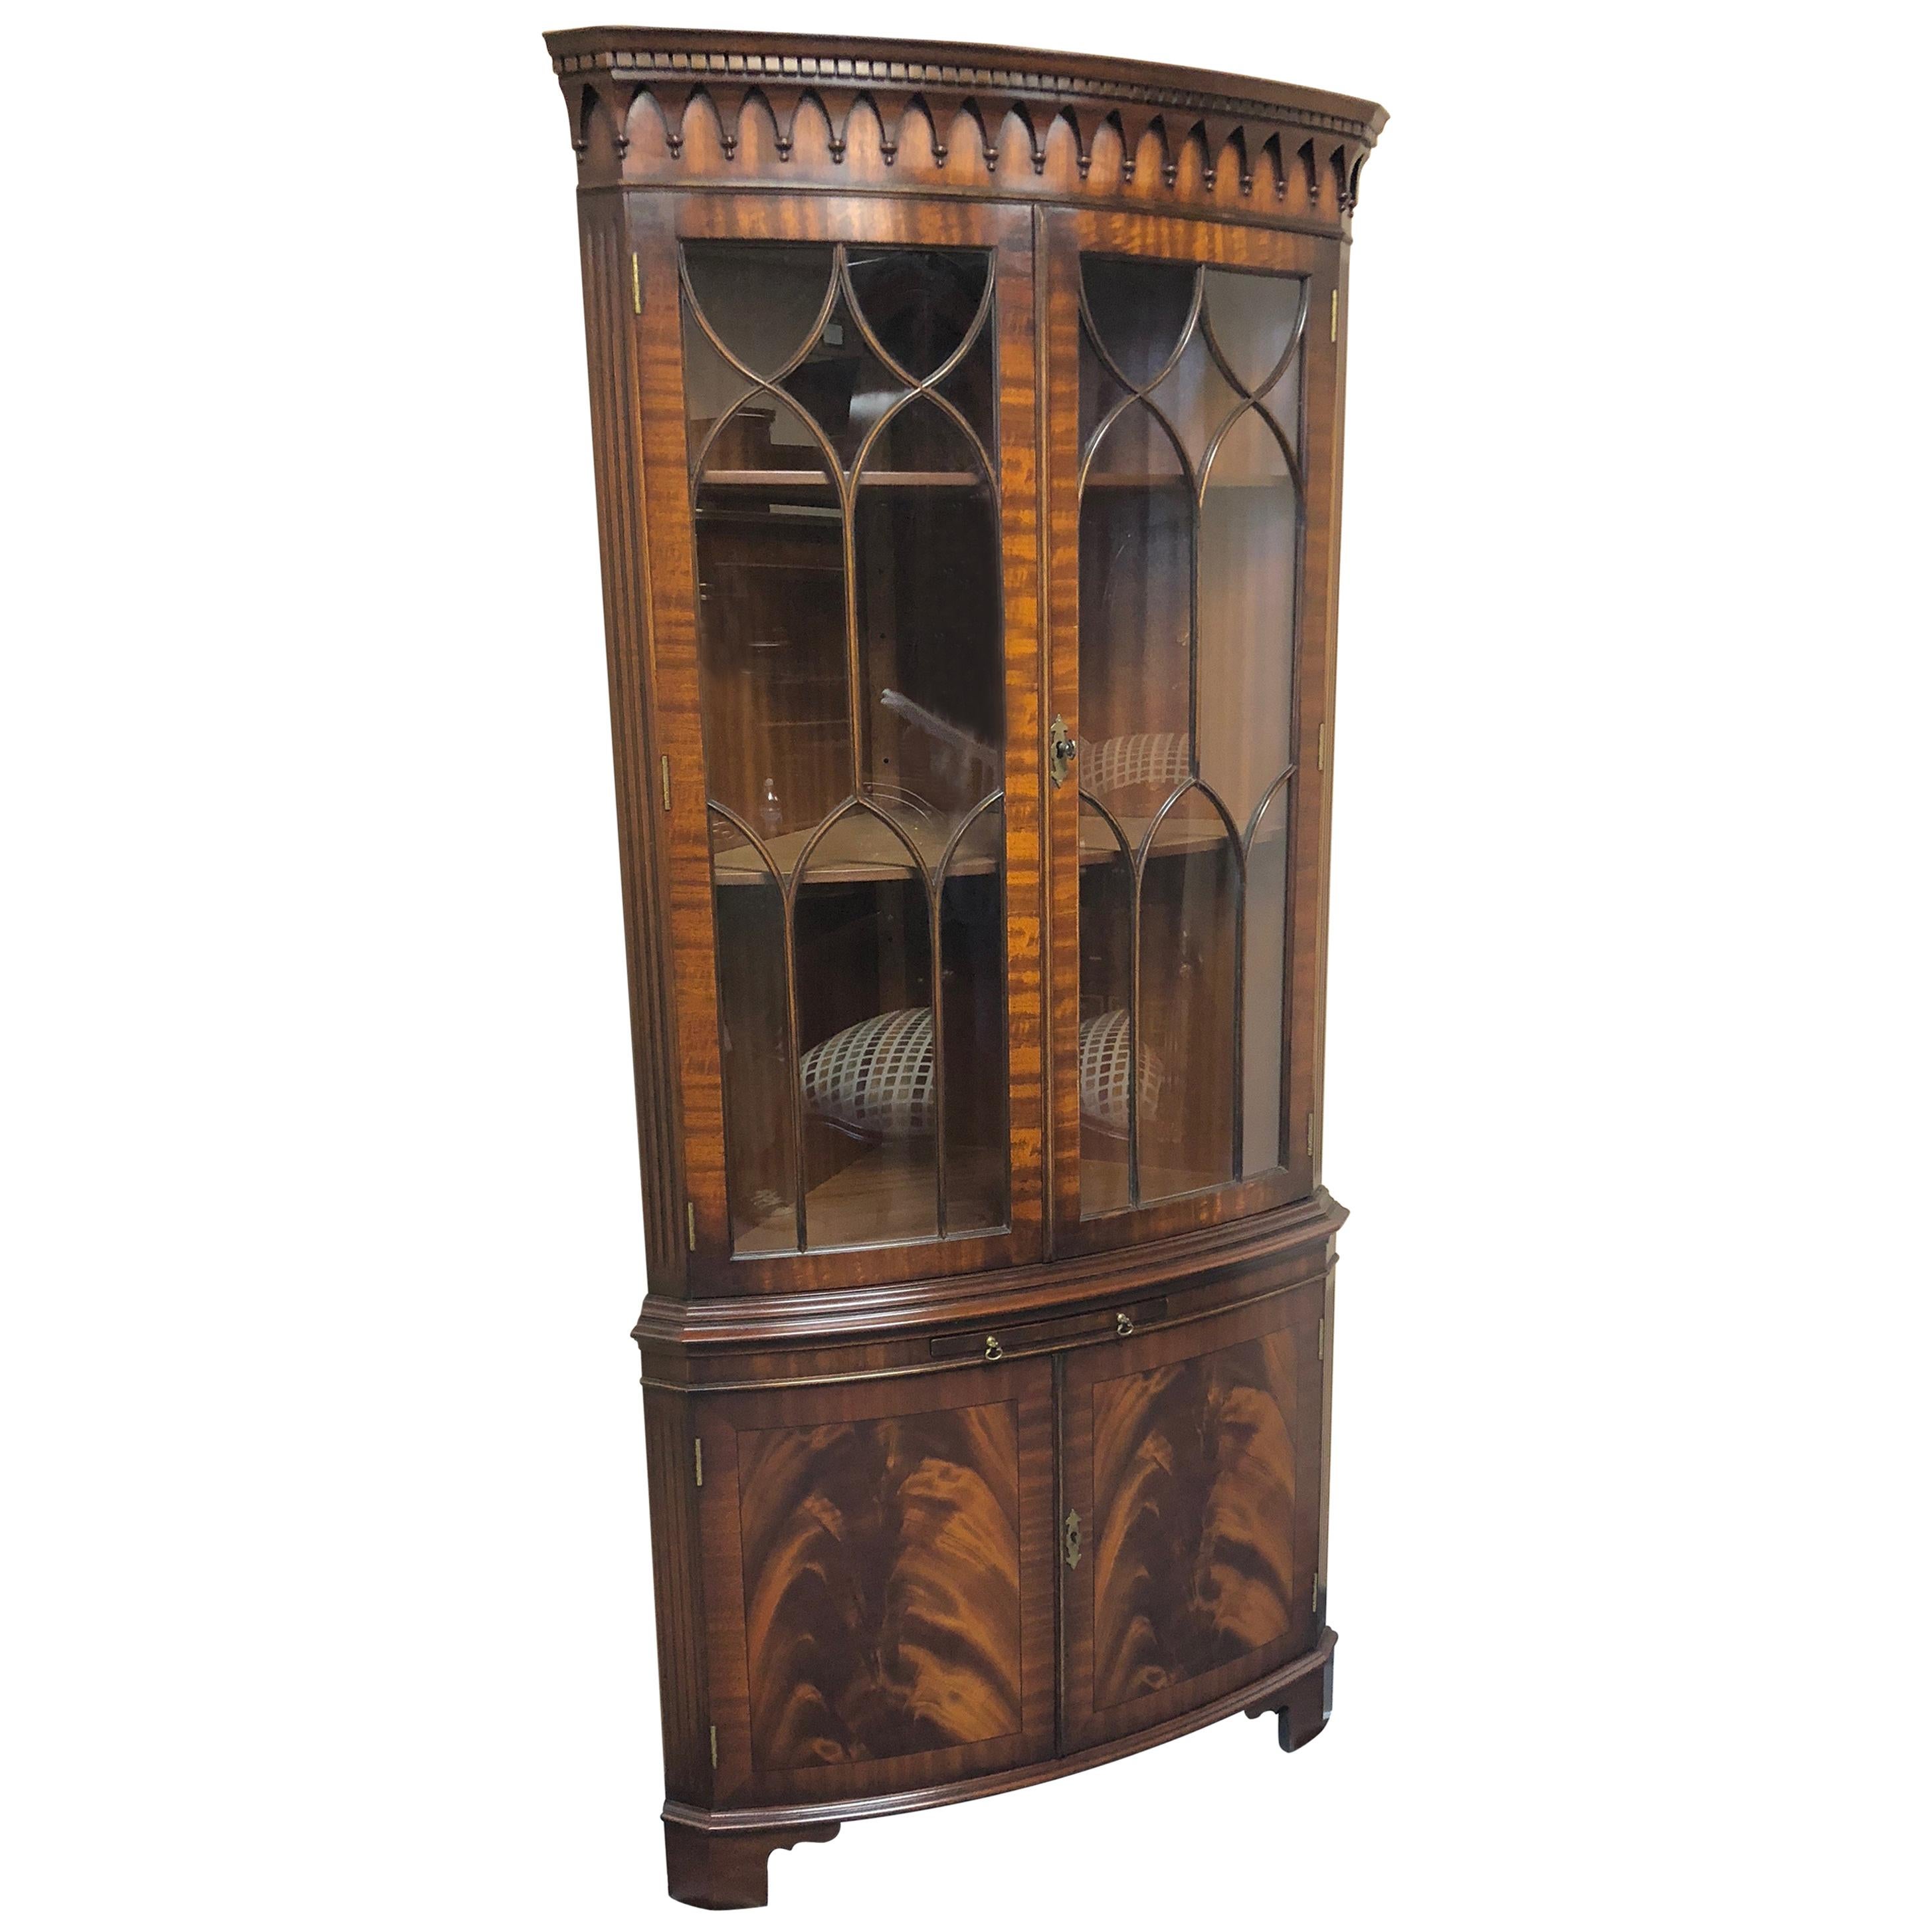 Lovely Flame Mahogany English Corner Cabinet by Bevan Funnell